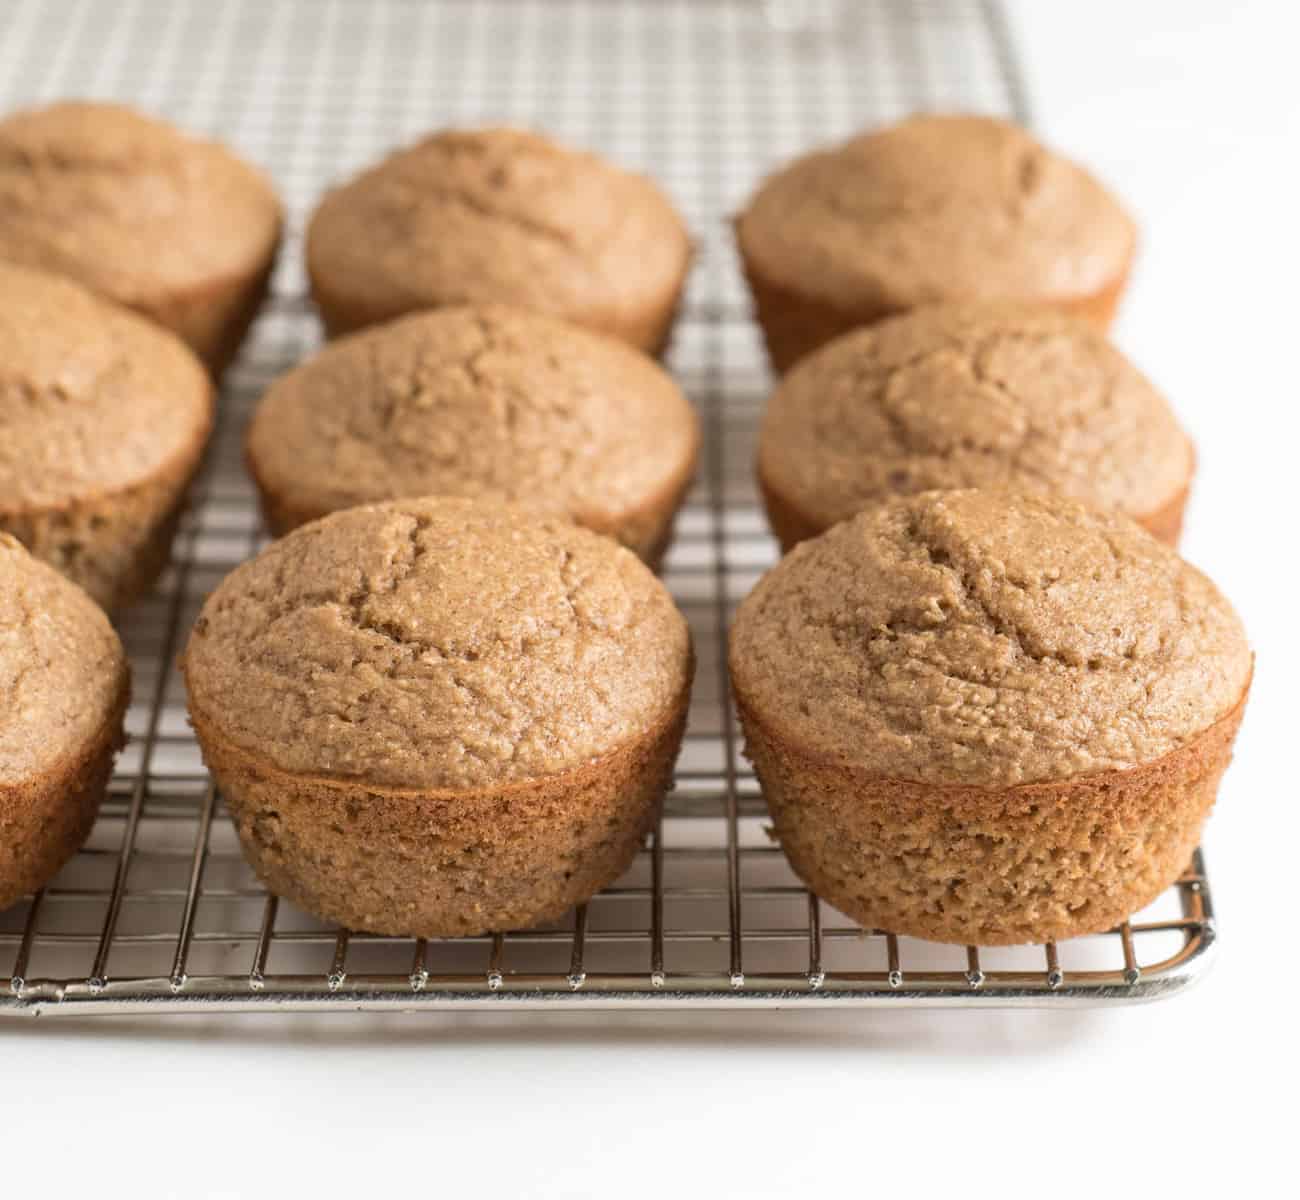 Healthy Apple Cinnamon Muffins that are made in the blender! Made with whole grain oats, apple sauce, maple syrup, and other wholesome ingredients.